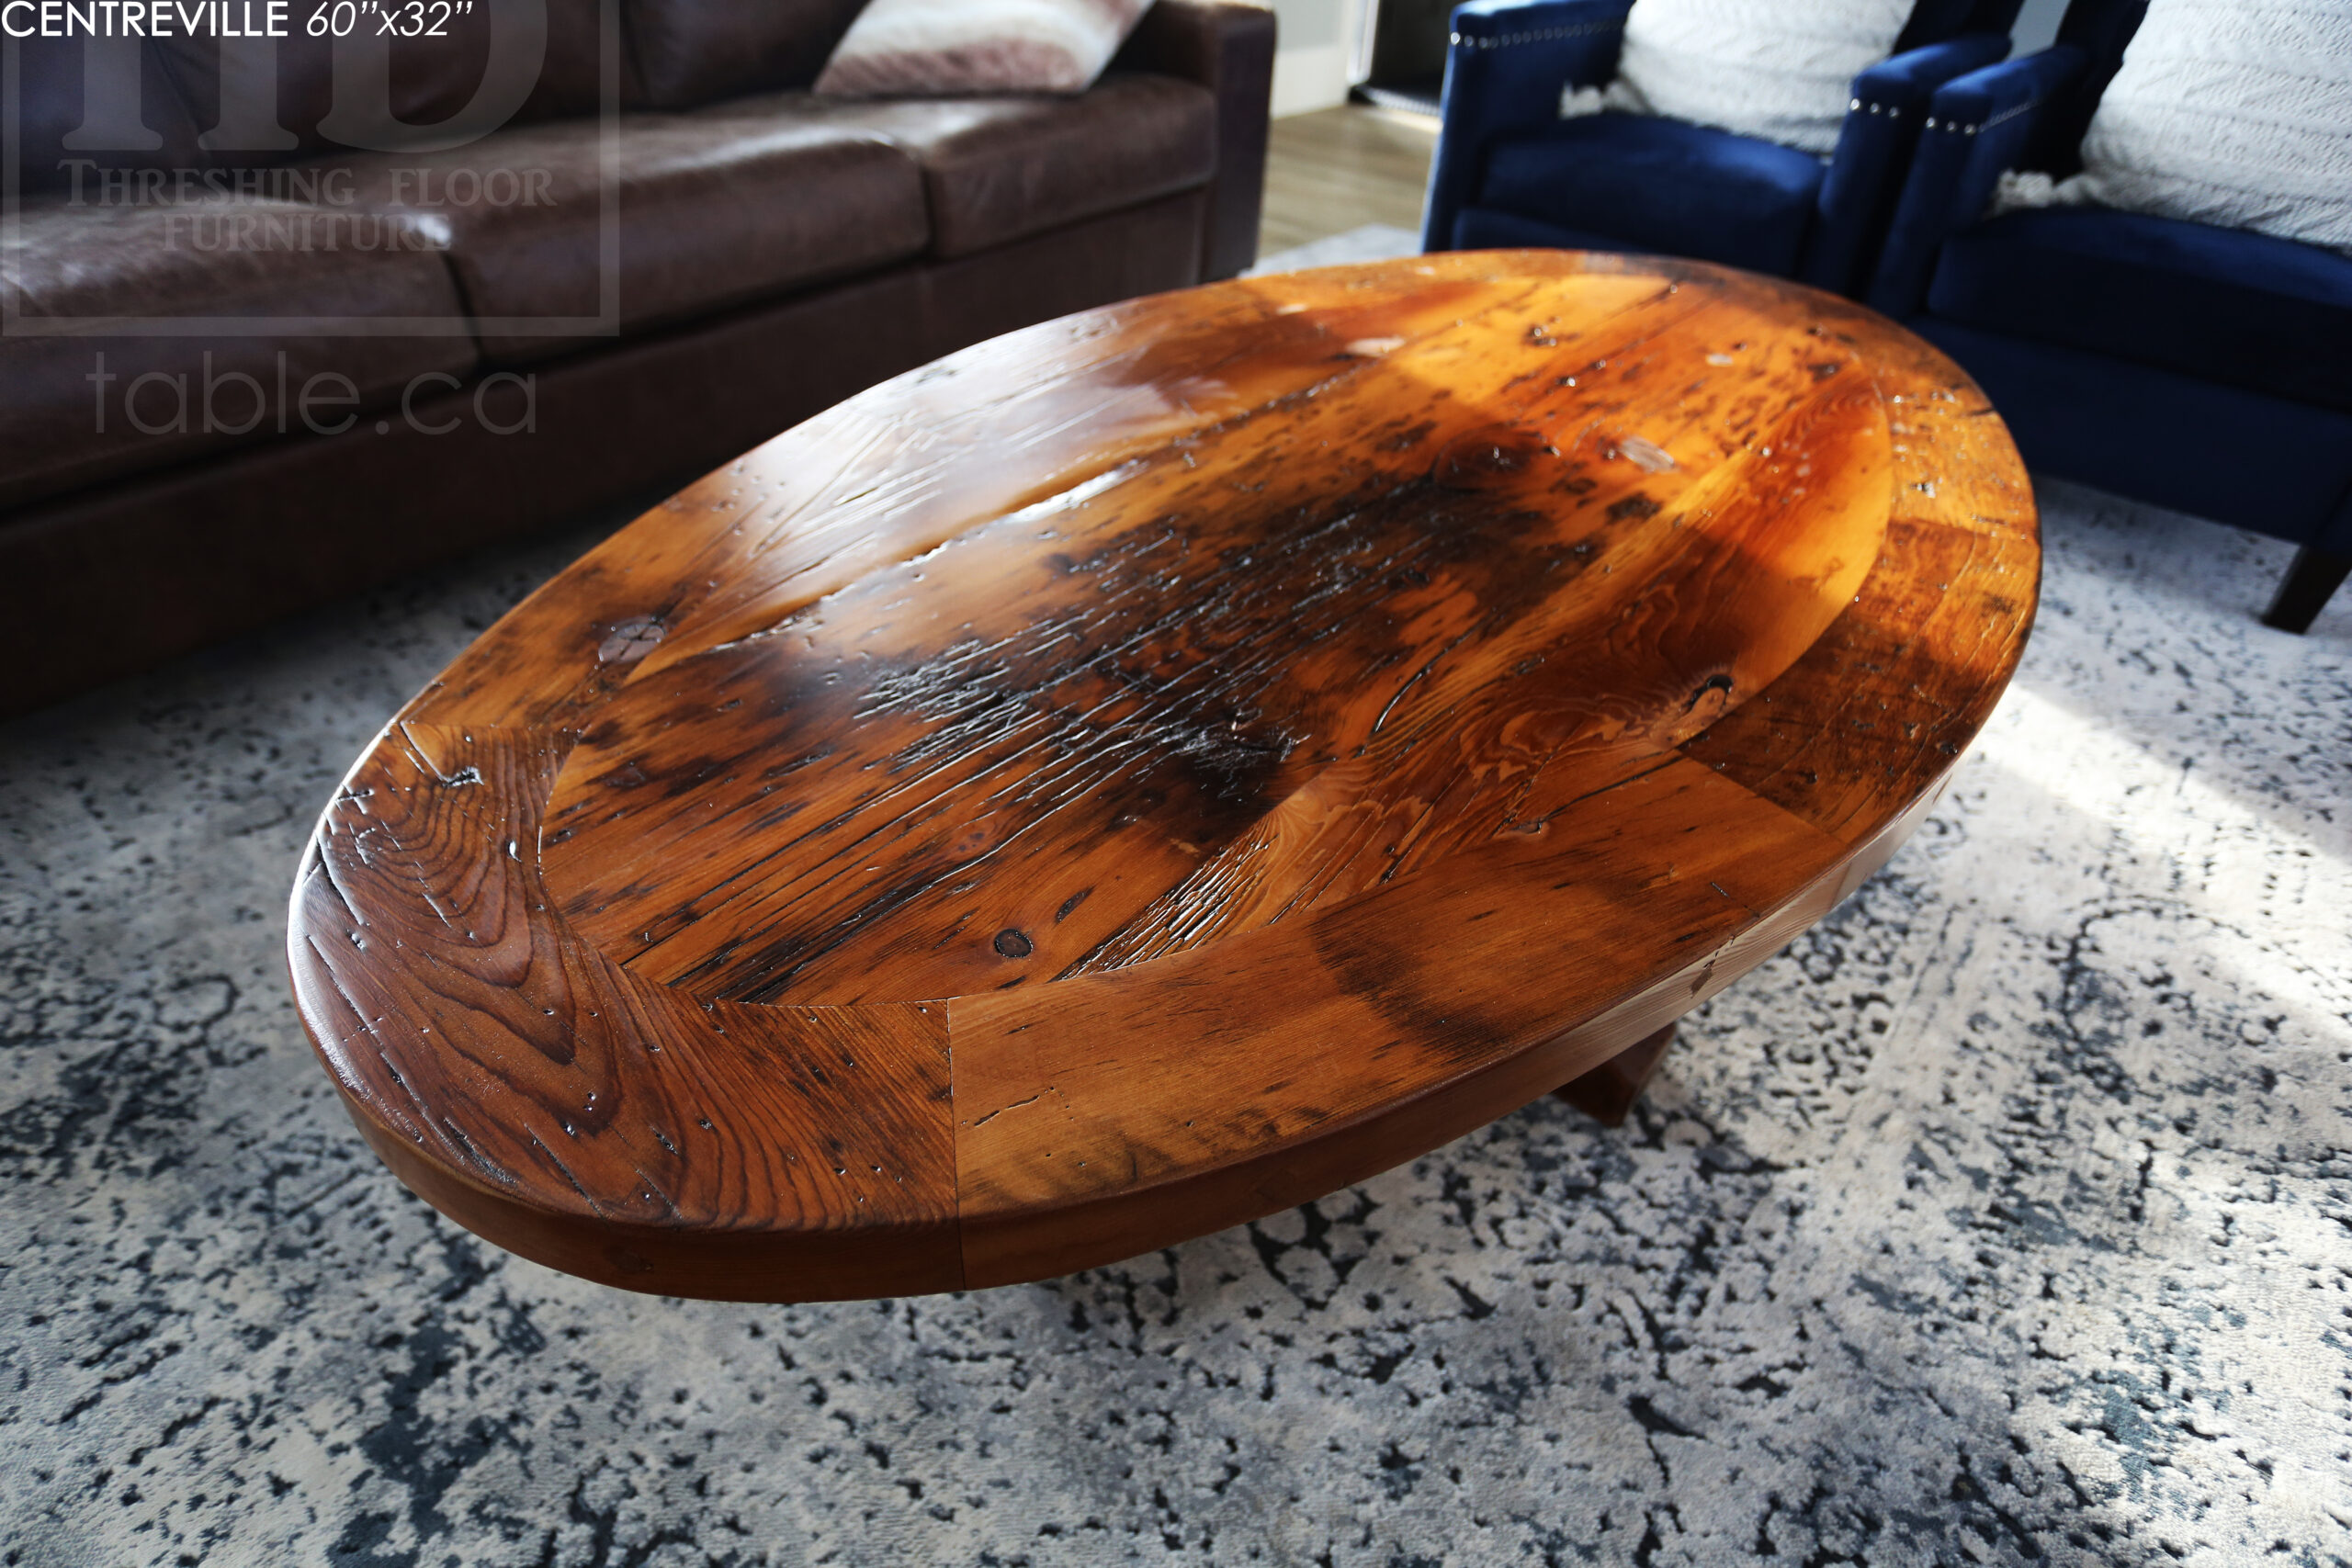 60" Ontario Barnwood Coffee Table we made for an Ingersoll, Ontario home - 32" wide in centre - Eliptical shaped - Hand-Hewn Beam Pedestal Base - 2" Old Growth Pine Threshing Floor Construction top - Original edges & distressing maintained - Satin polyurethane finish - www.table.ca